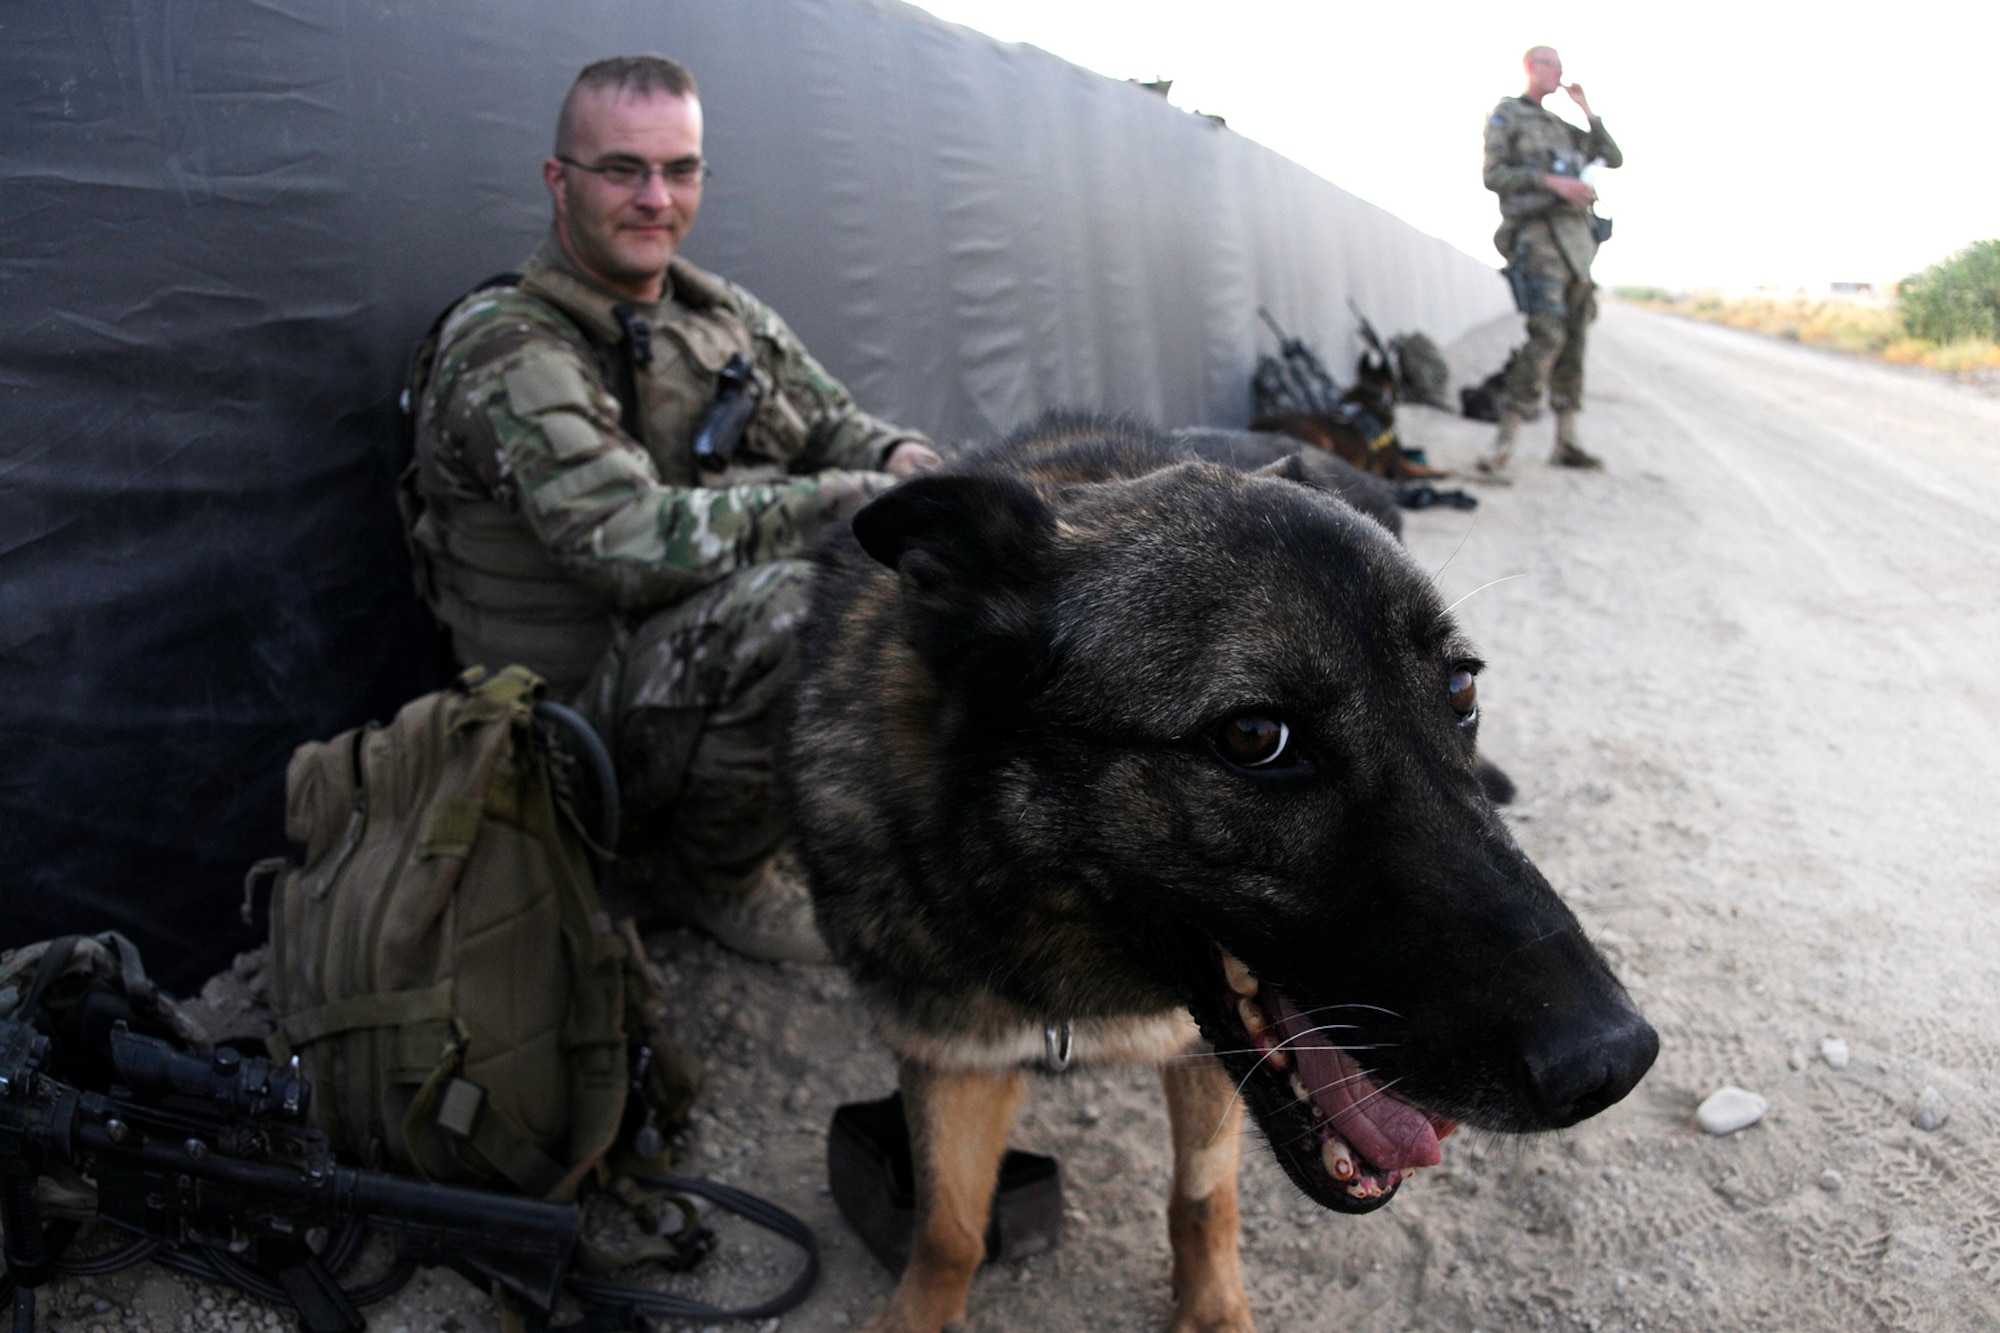 U.S. Air Force Tech. Sgt. Matthew Mosher, a Military Working Dog handler, and his dog, Zix, a Patrol Explosive Detection dog, prior to early-morning training on July 9, 2012 at Kandahar Airfield, Afghanistan. The handlers and their dogs rotate through Kandahar Airfield for validation prior to moving out to Forward Operating Bases around the country where they will lead combat foot patrols and sniff out IEDs and other explosives. (U.S. Air Force photo/TSgt. Stephen Hudson)